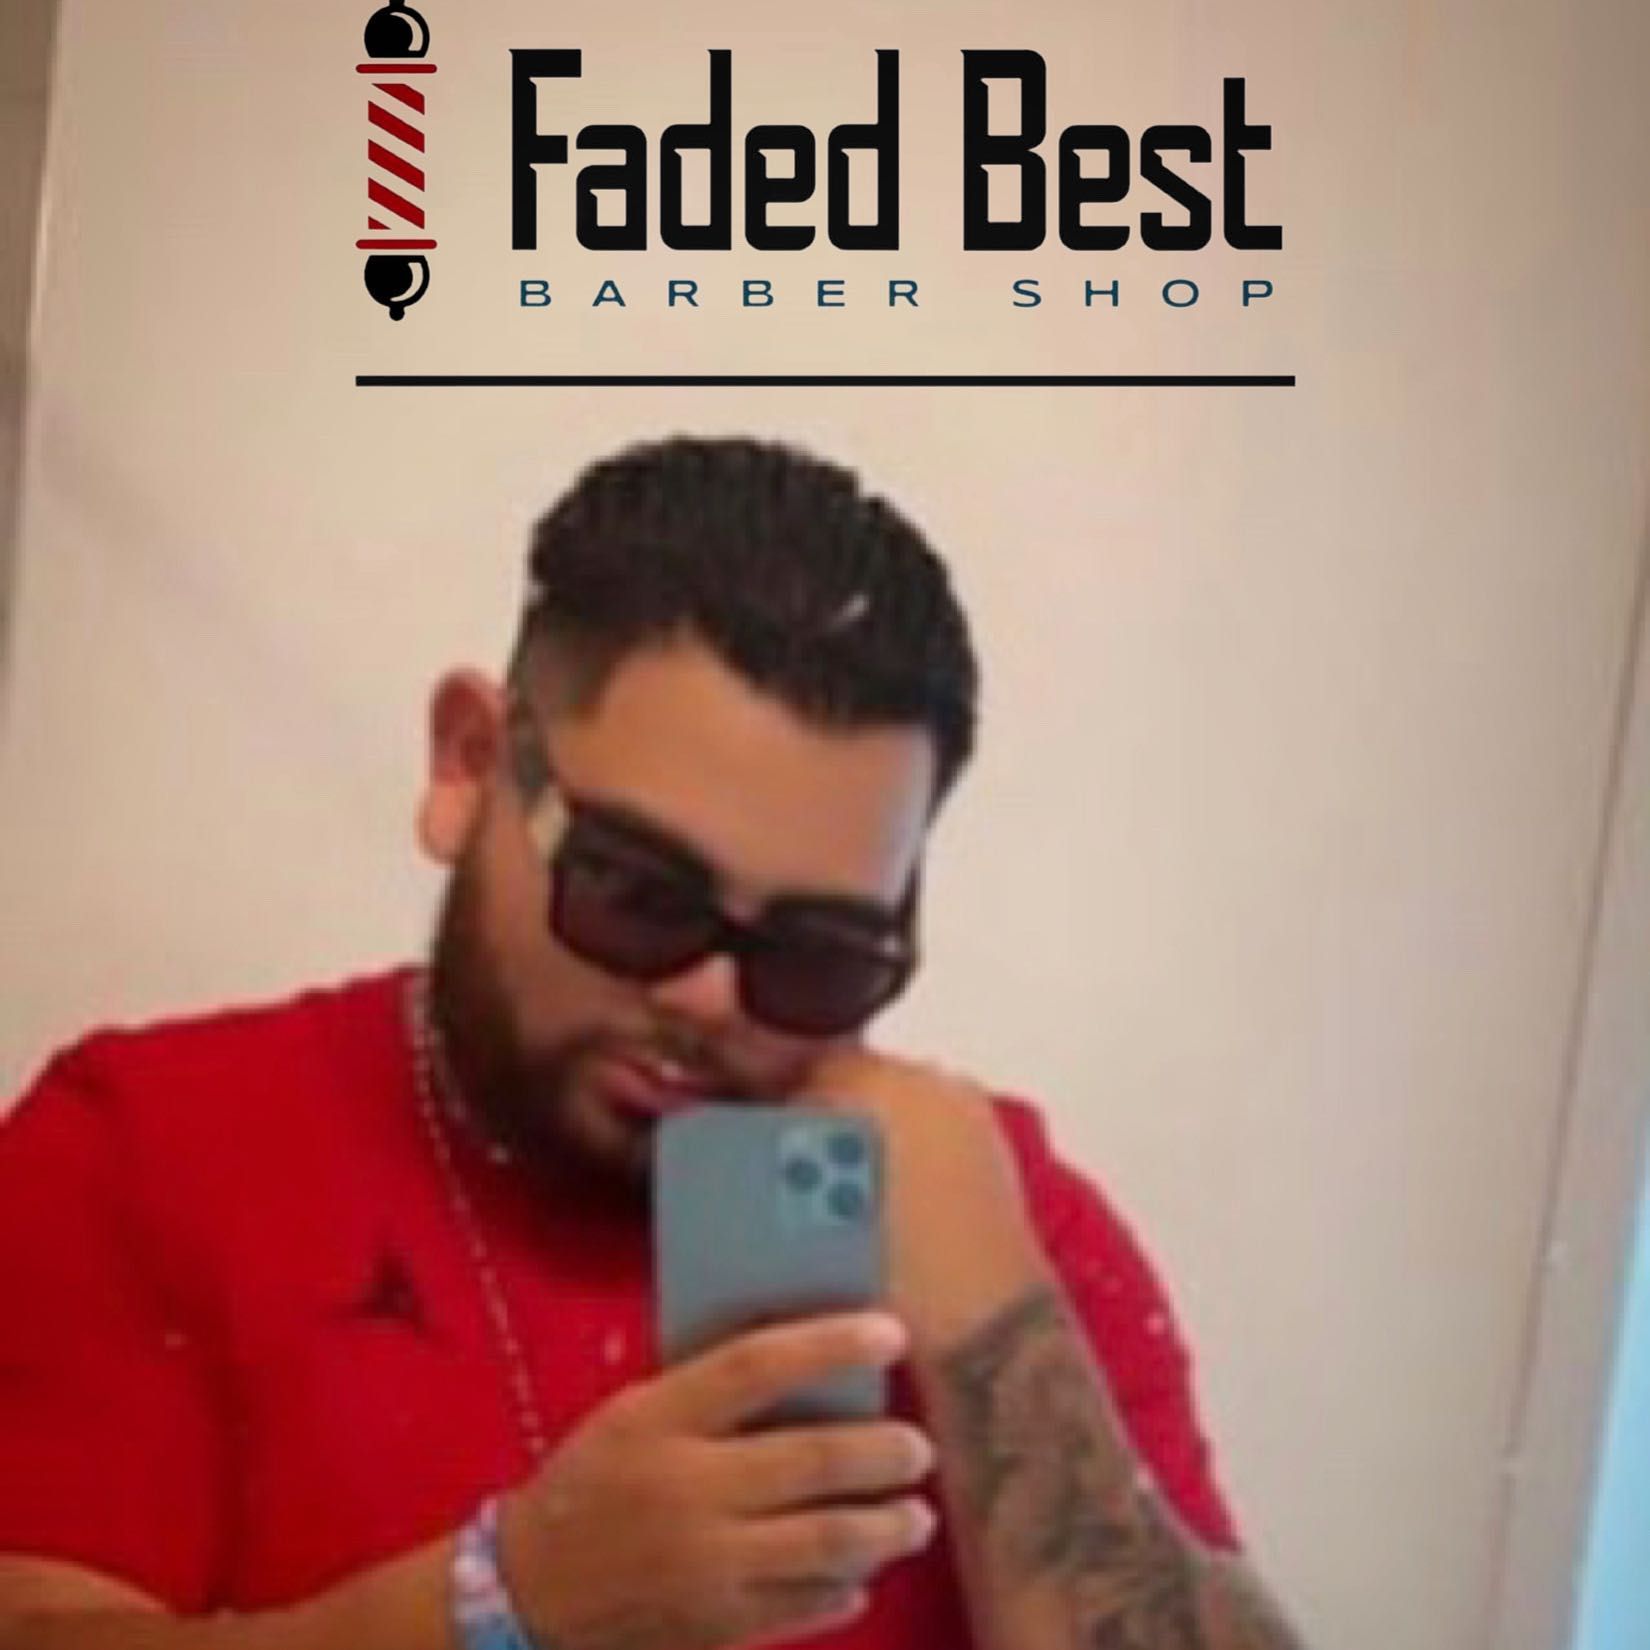 Pedro - Faded Best Barber Shop ( Cheapest Fade In 10 Miles ! )